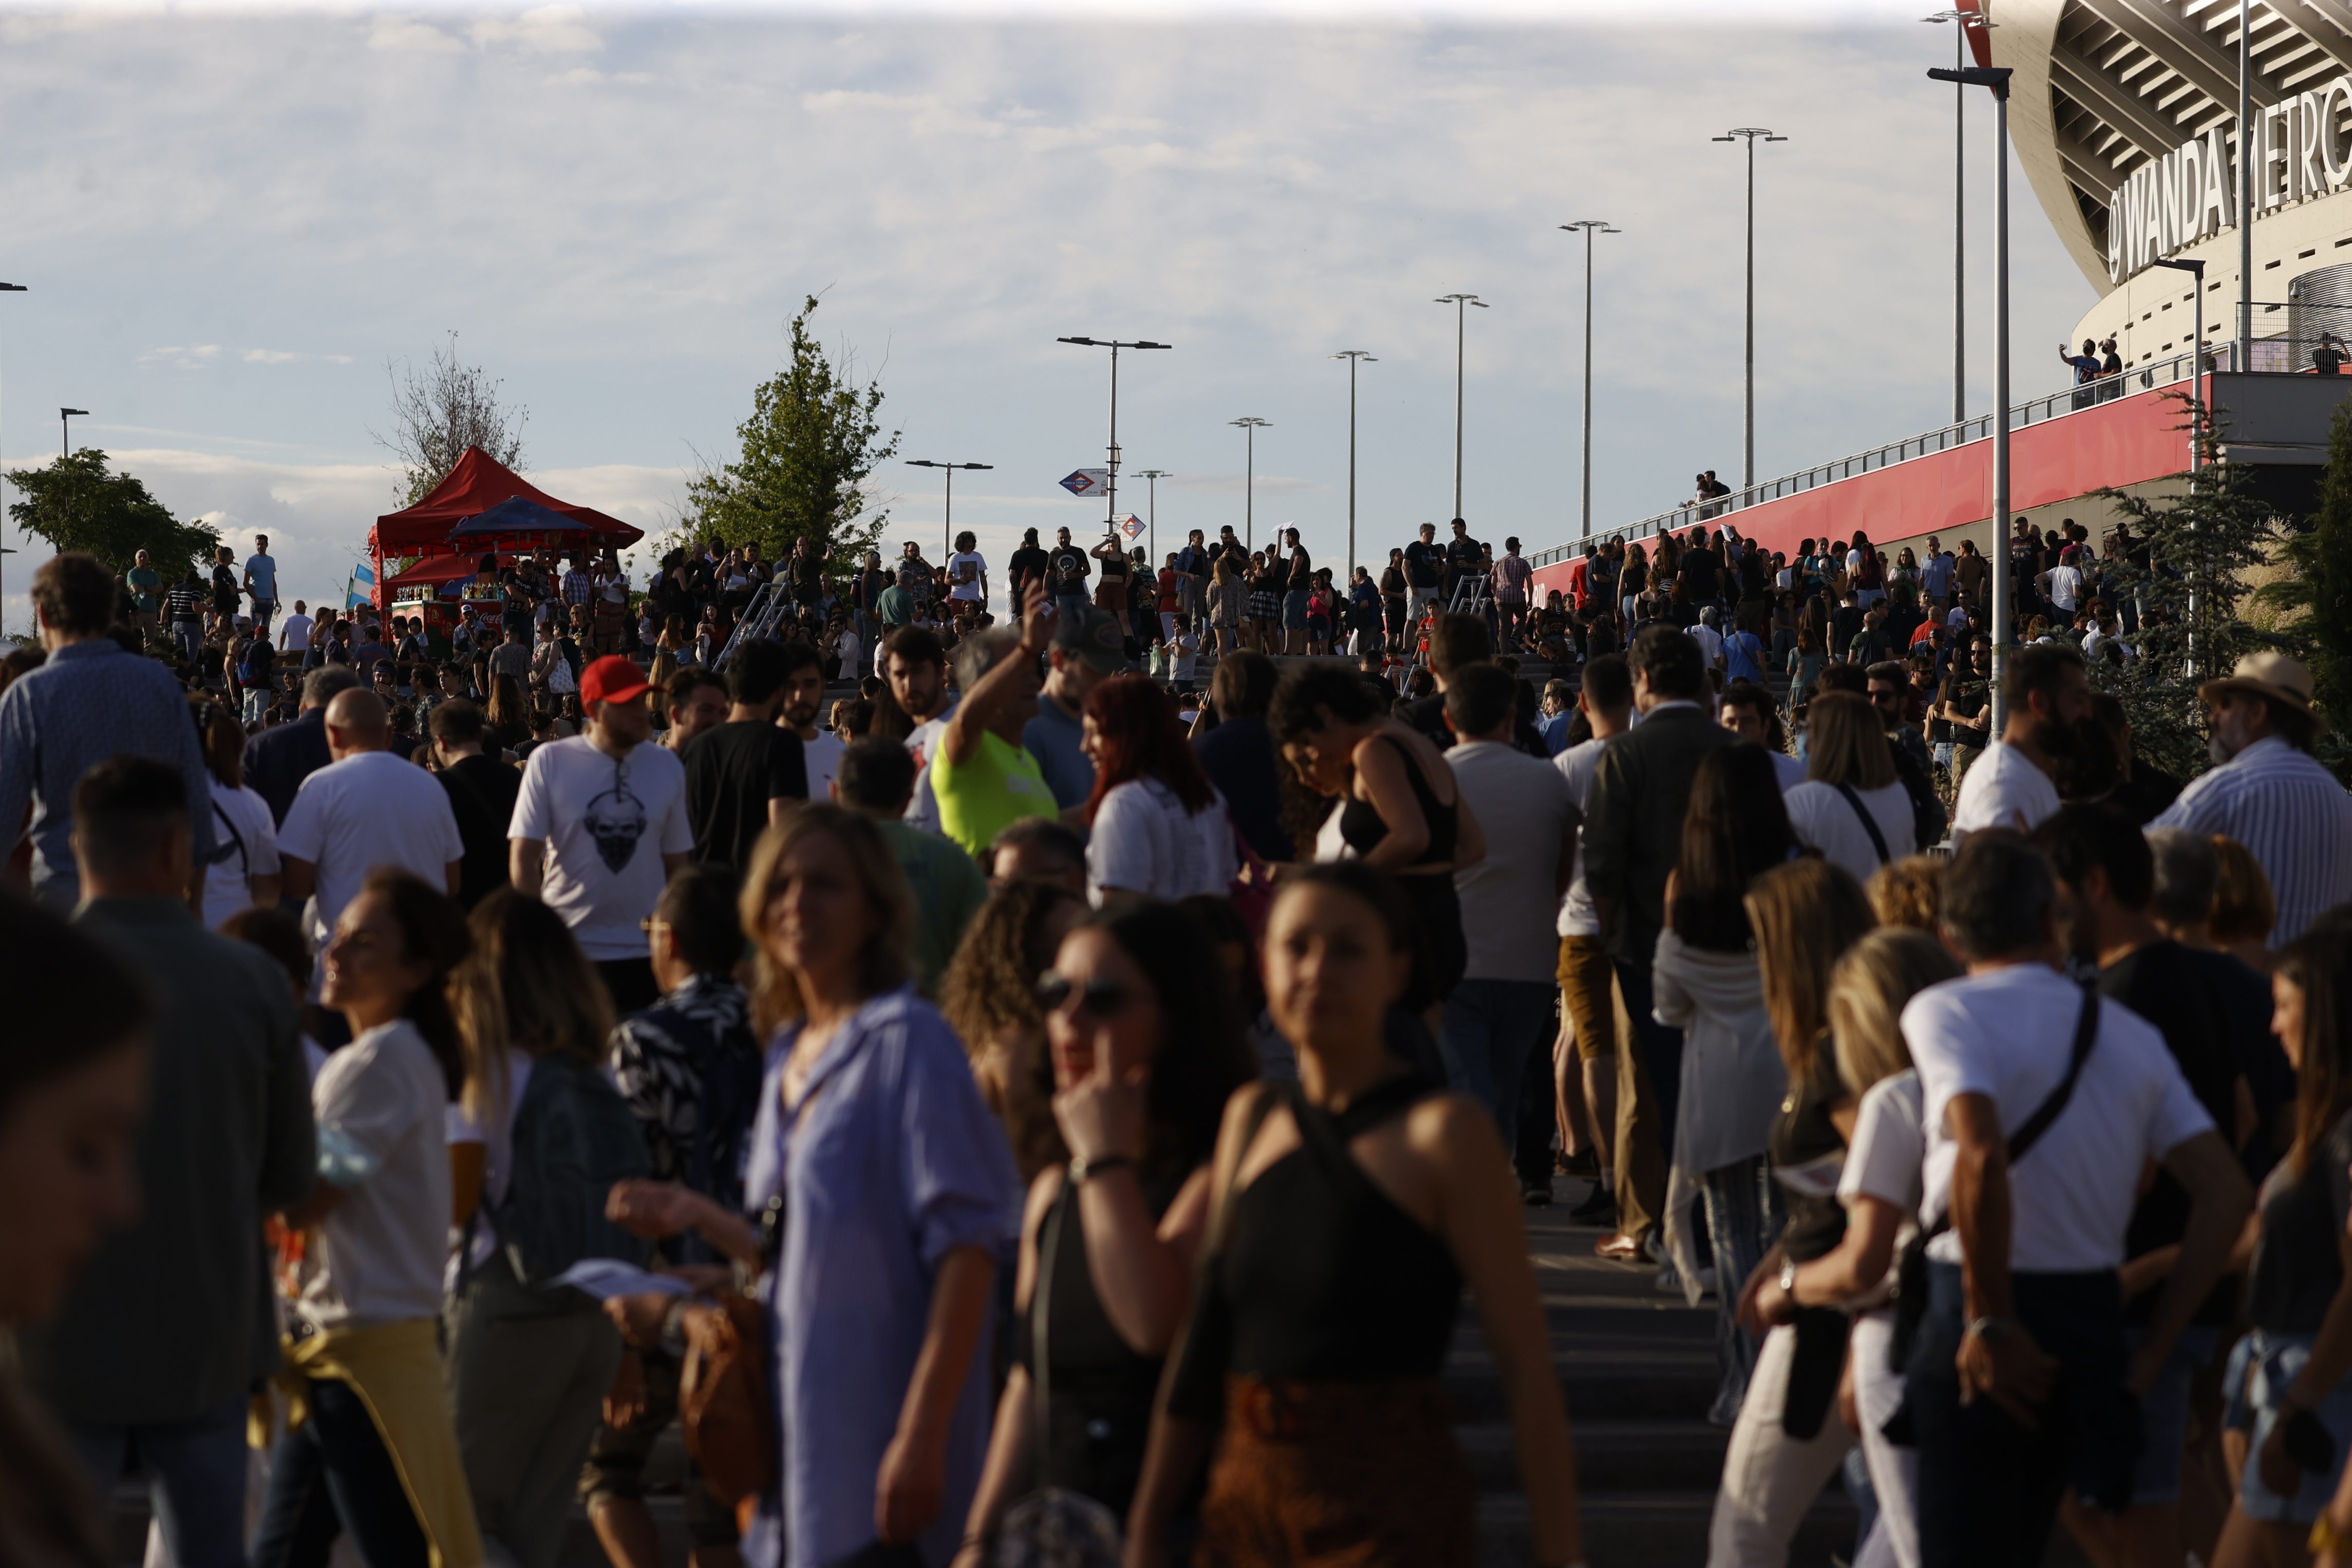 Dozens of people walk around the outskirts of the Wanda Metropolitano stadium in Madrid to attend the concert by the Rolling Stones band.